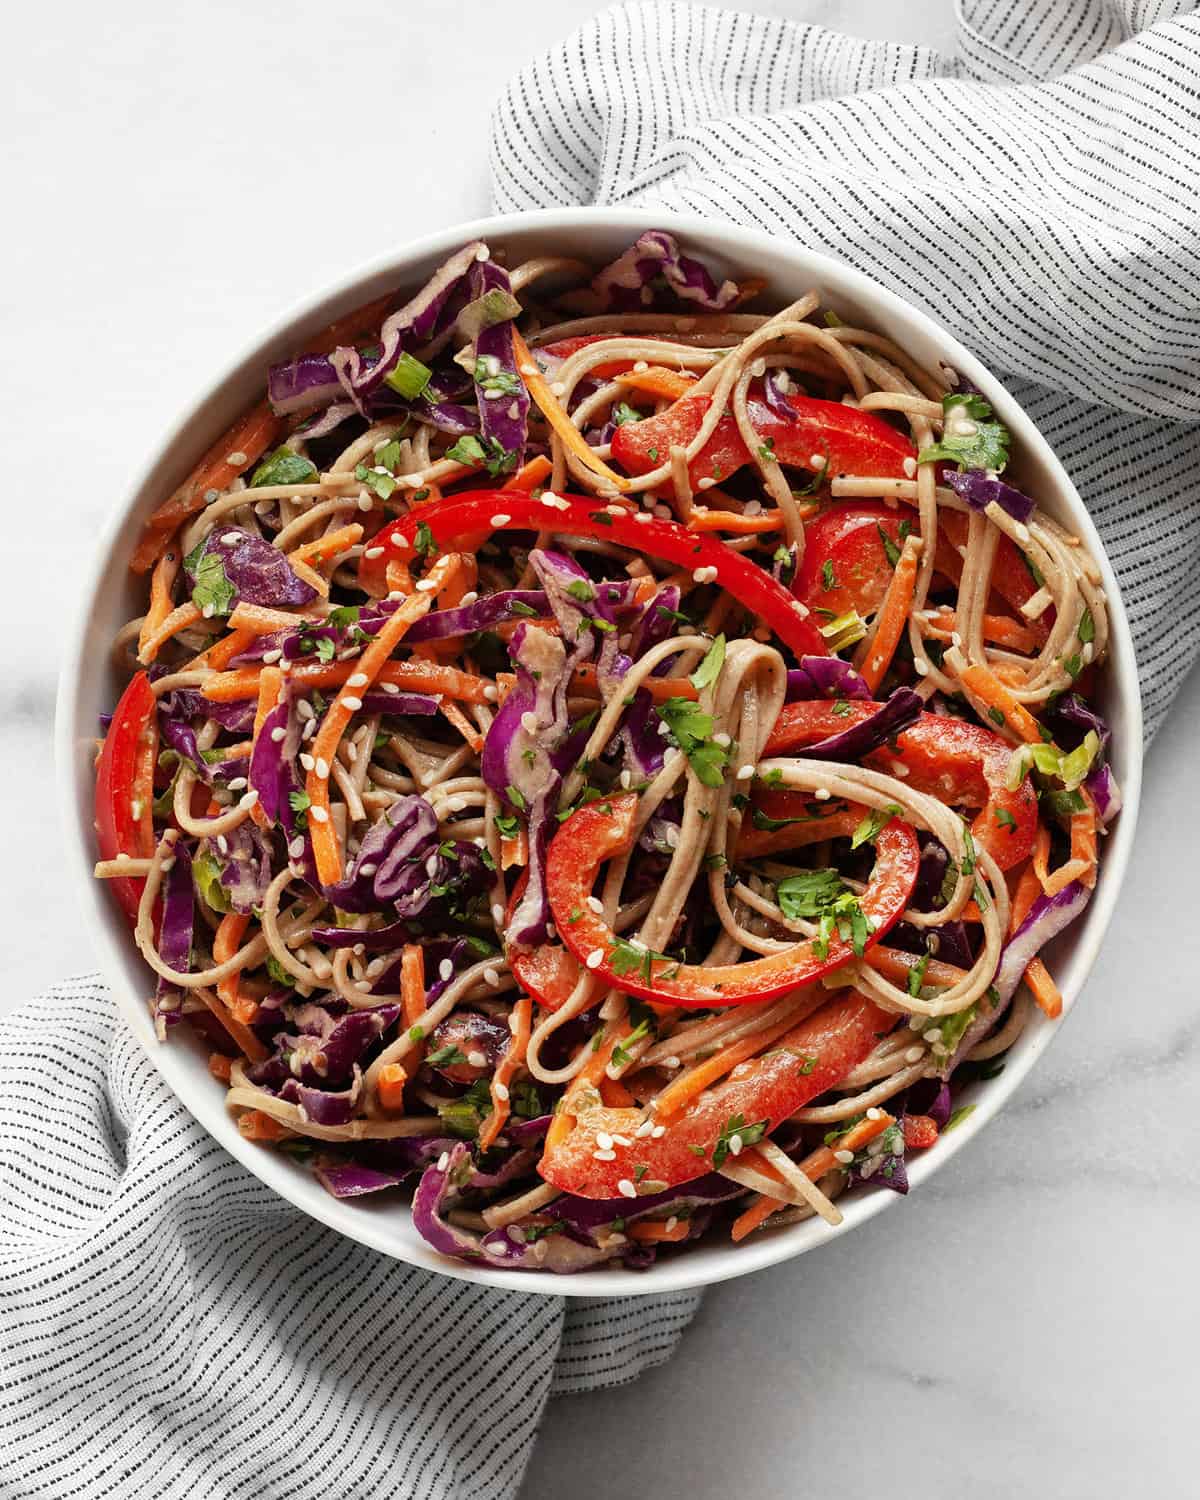 Soba noodle salad in a small bowl.